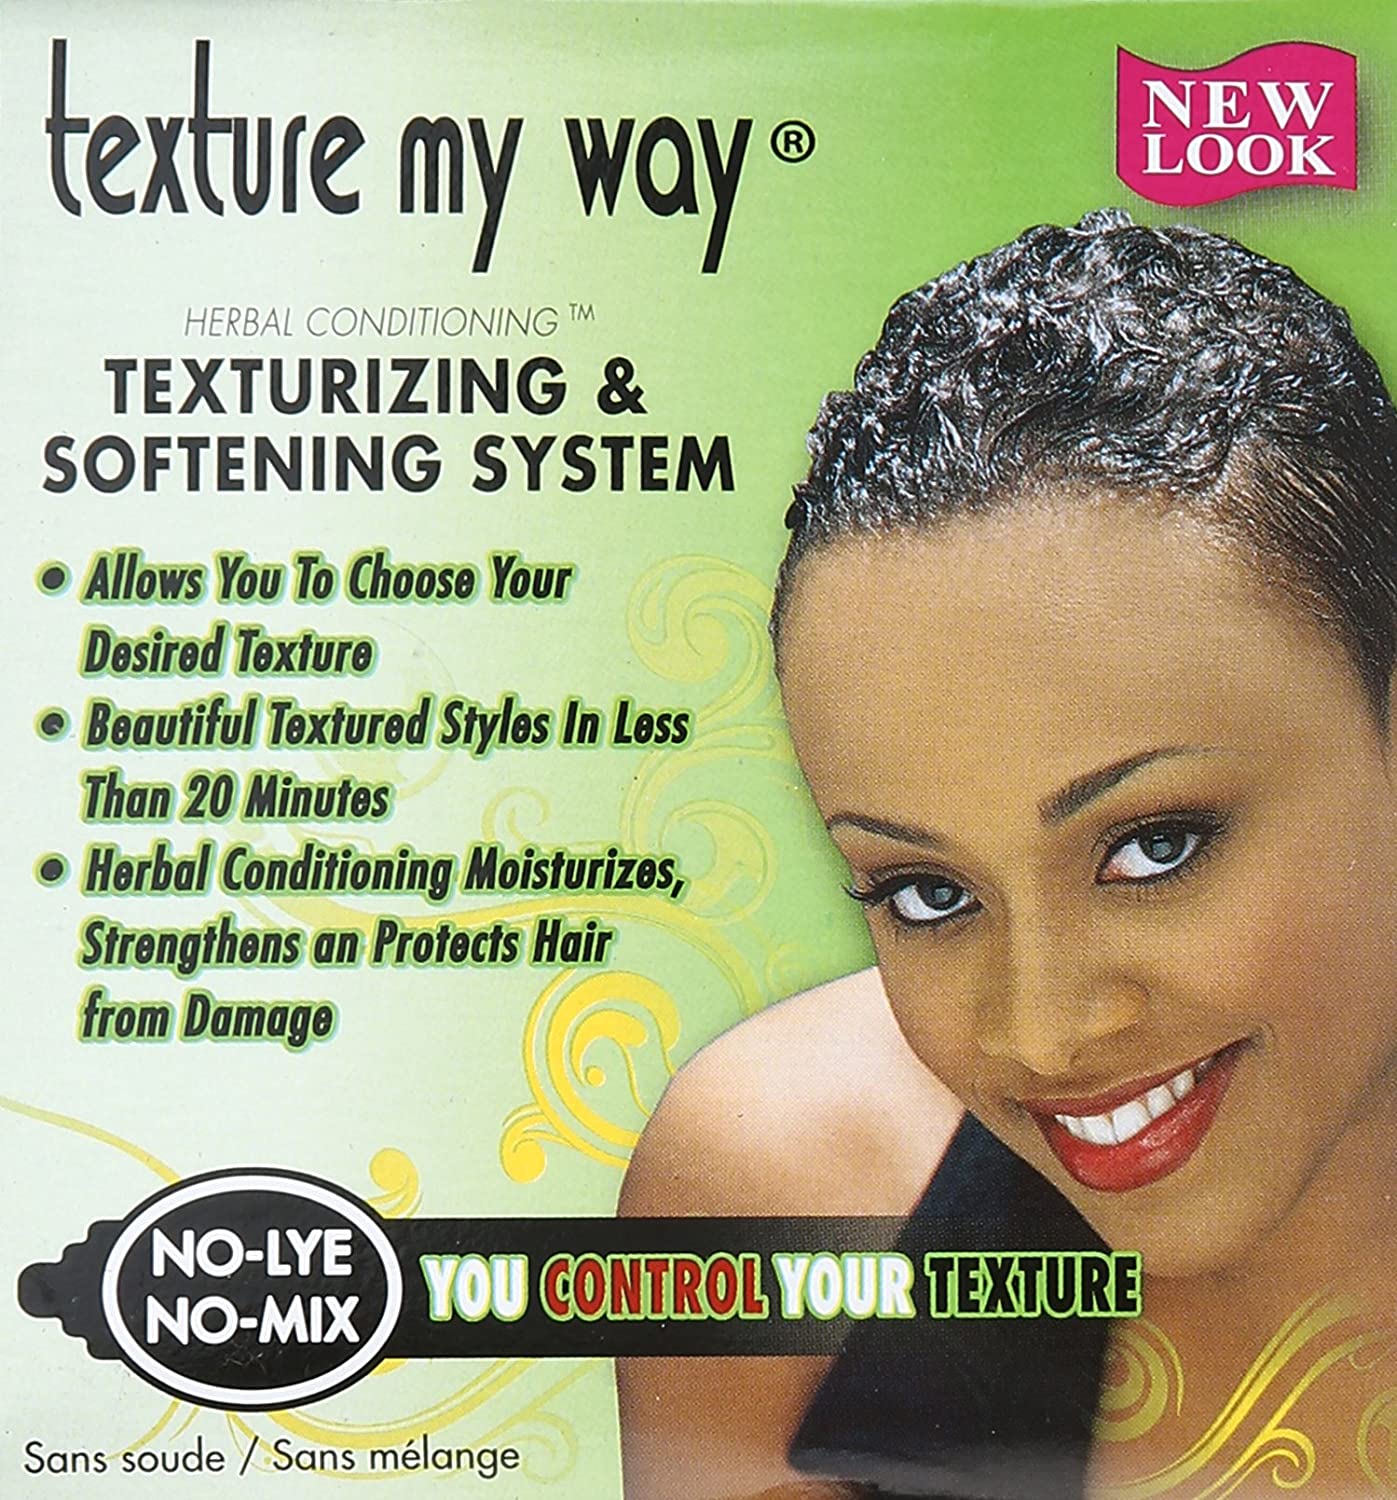 Organics My Way No-Lye Organic Conditioning Texturizing System Find Your New Look Today!